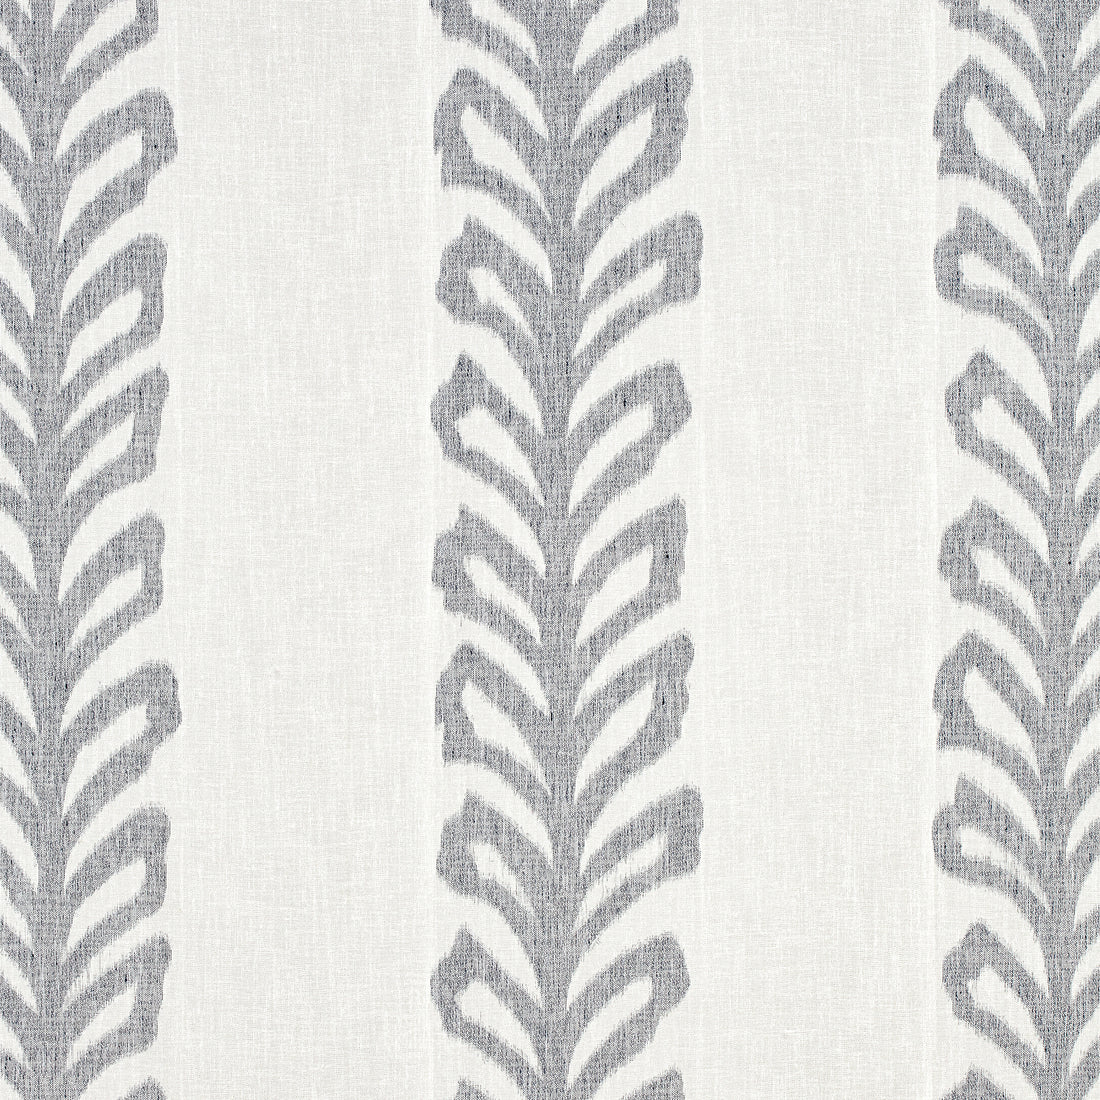 Lenox Sheer fabric in navy color - pattern number FWW7145 - by Thibaut in the Atmosphere collection